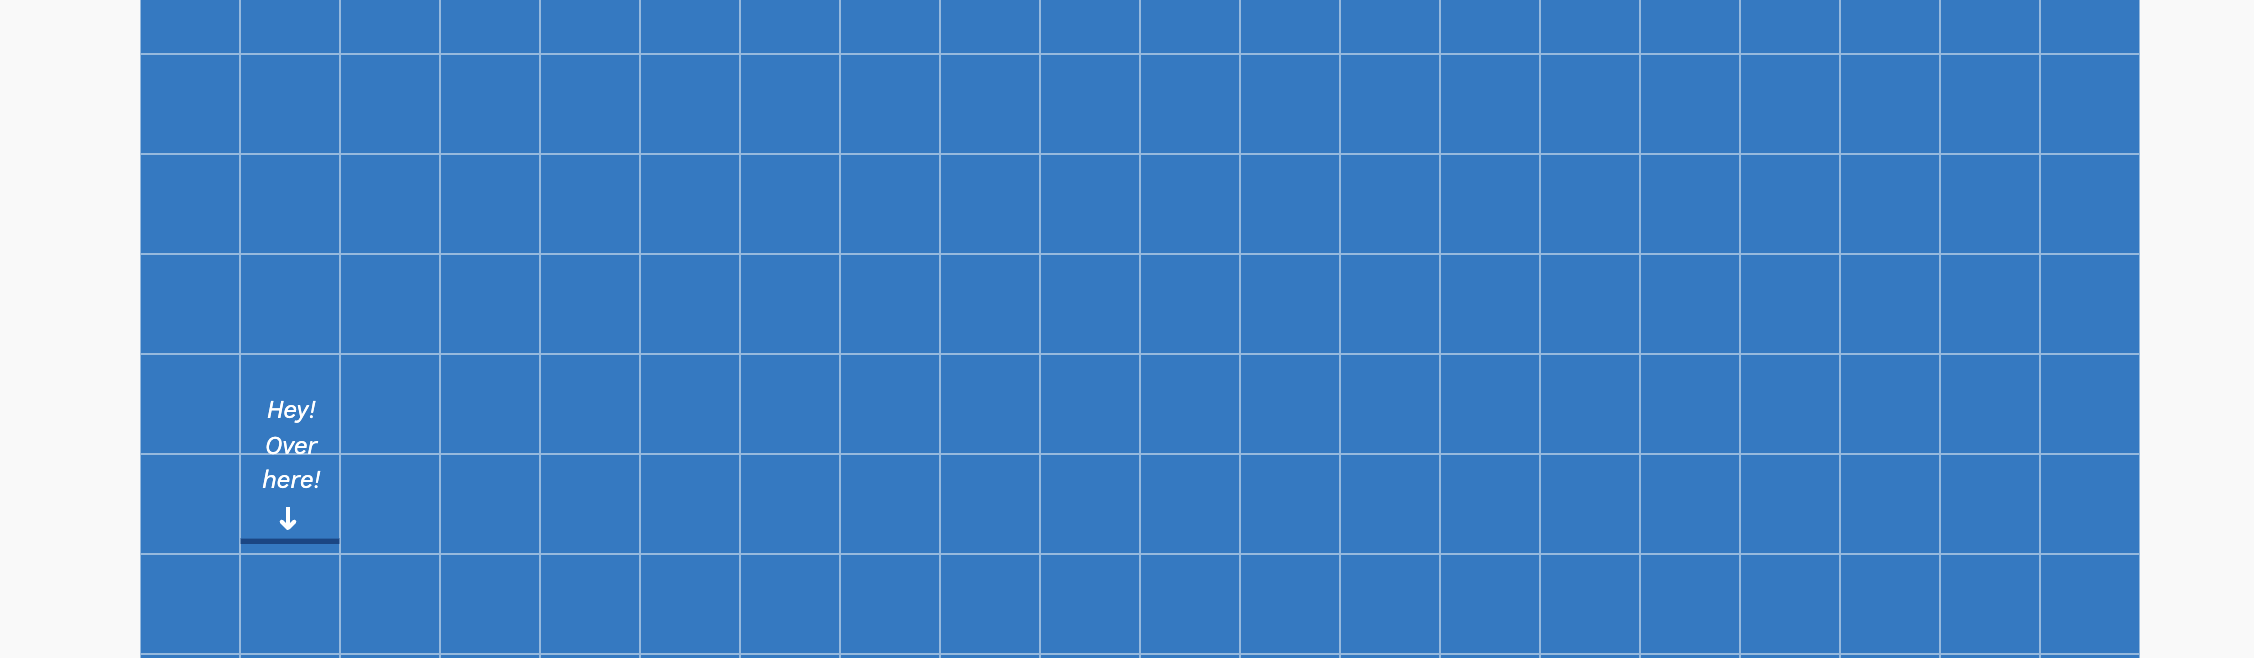 A grid of blue squares with a tiny sliver highlighted and labeled "Hey! Over here!"